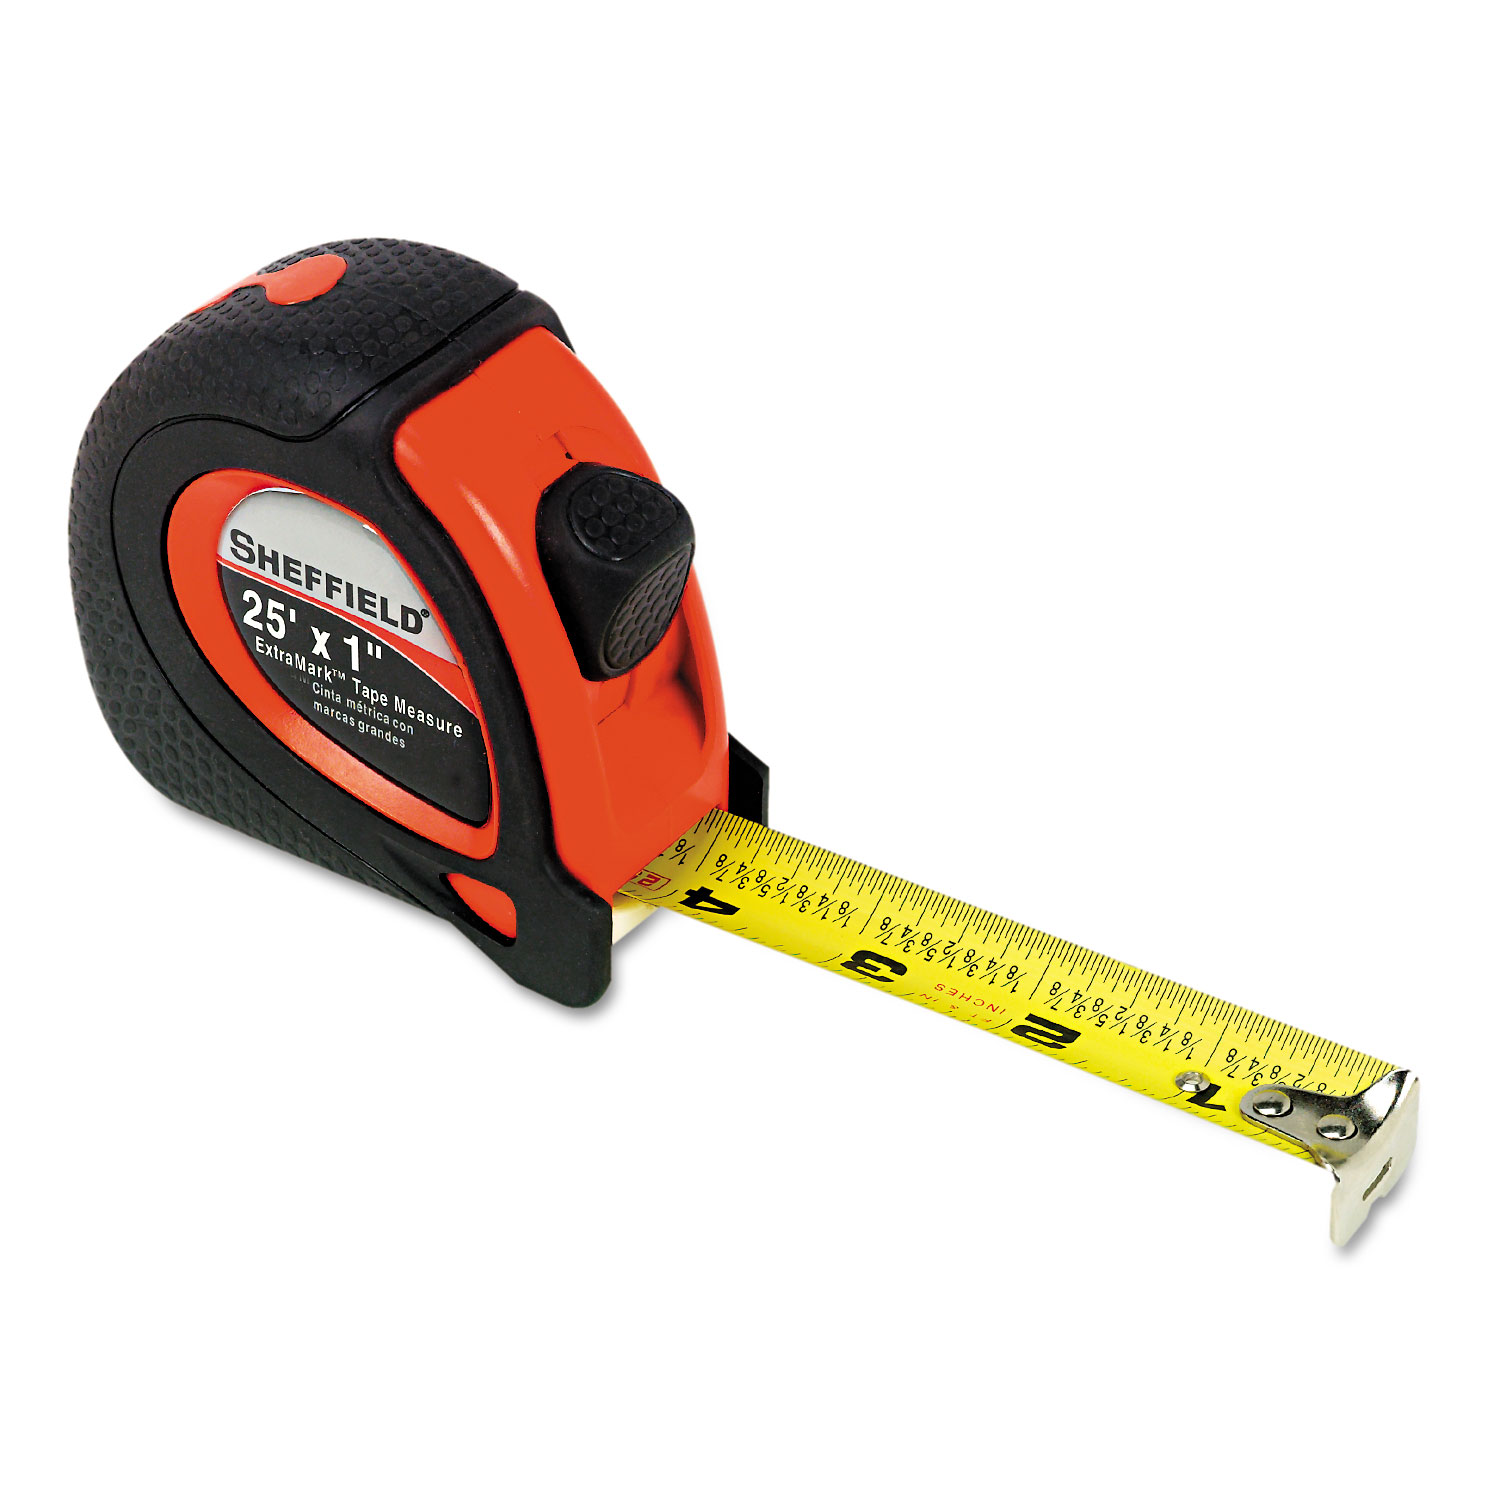  Great Neck 58652 Sheffield ExtraMark Tape Measure, Red with Black Rubber Grip, 1 x 25 ft (GNS58652) 